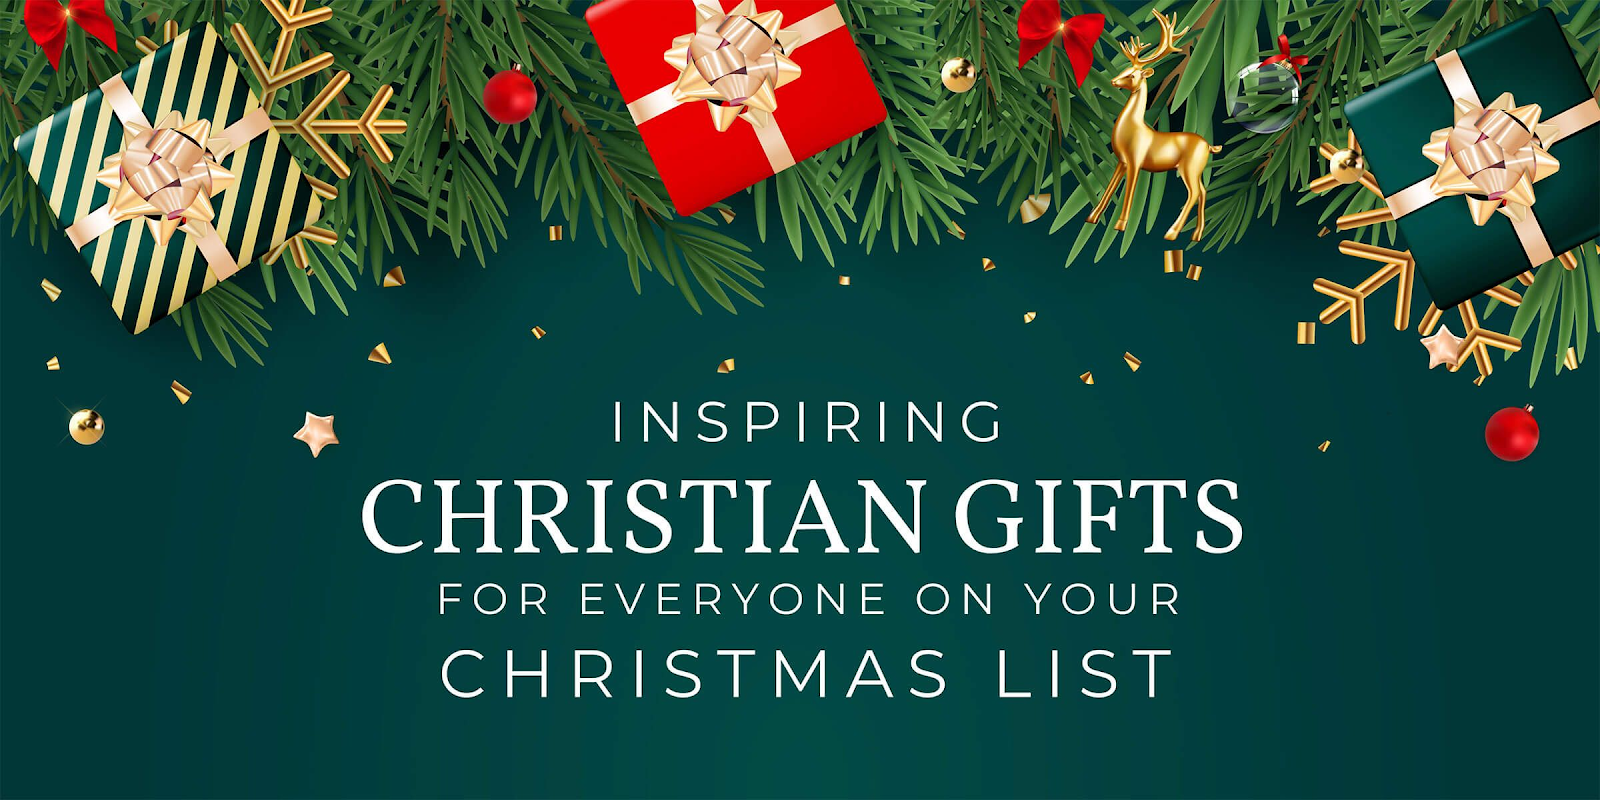 Inspiring Christian Gifts for Everyone on Your Christmas List